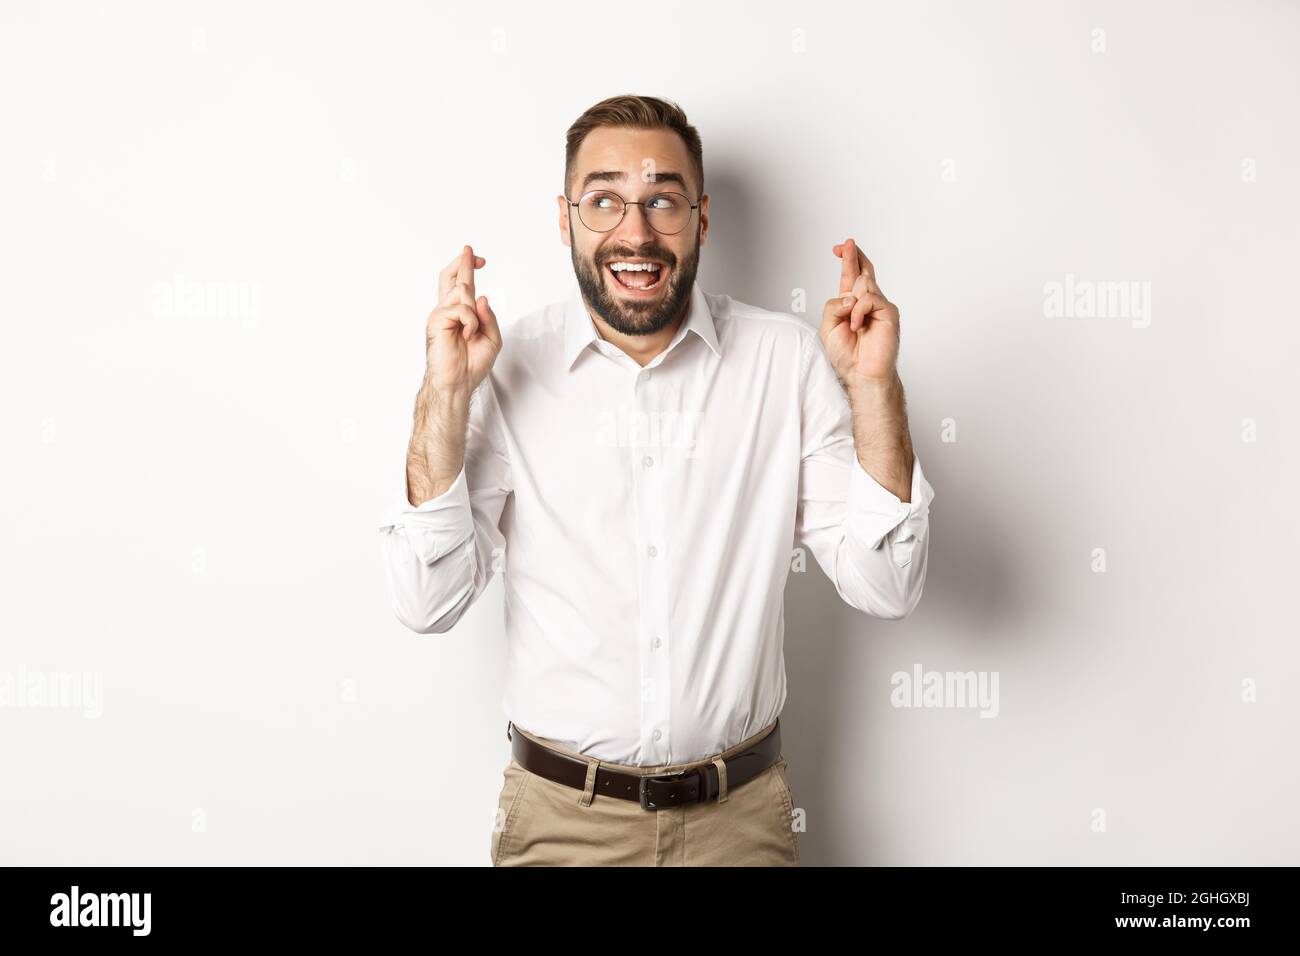 Excited and hopeful businessman making a wish, cross fingers and waiting, standing over white background Stock Photo